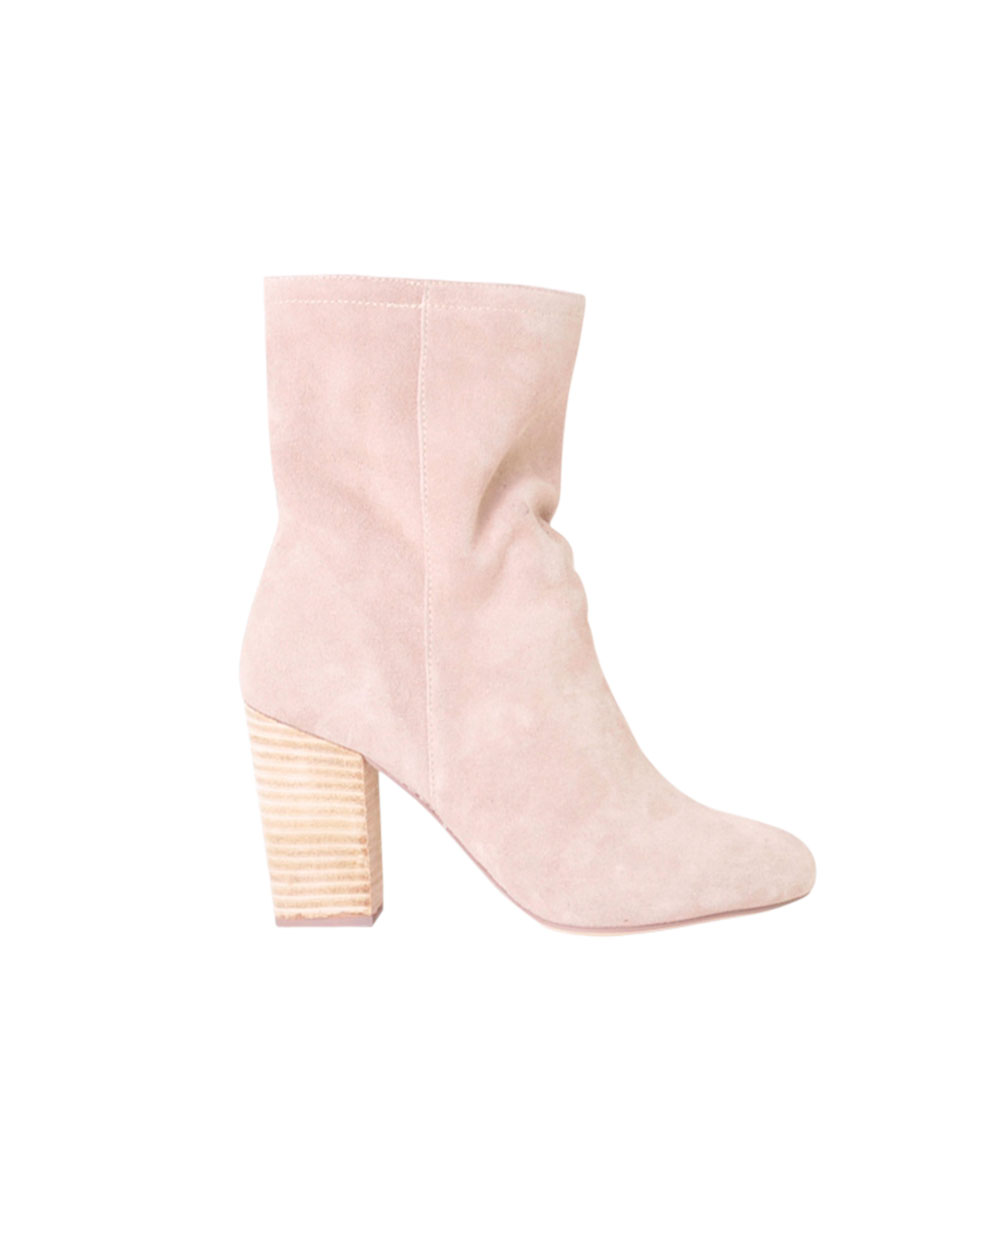 Nude boots, $210